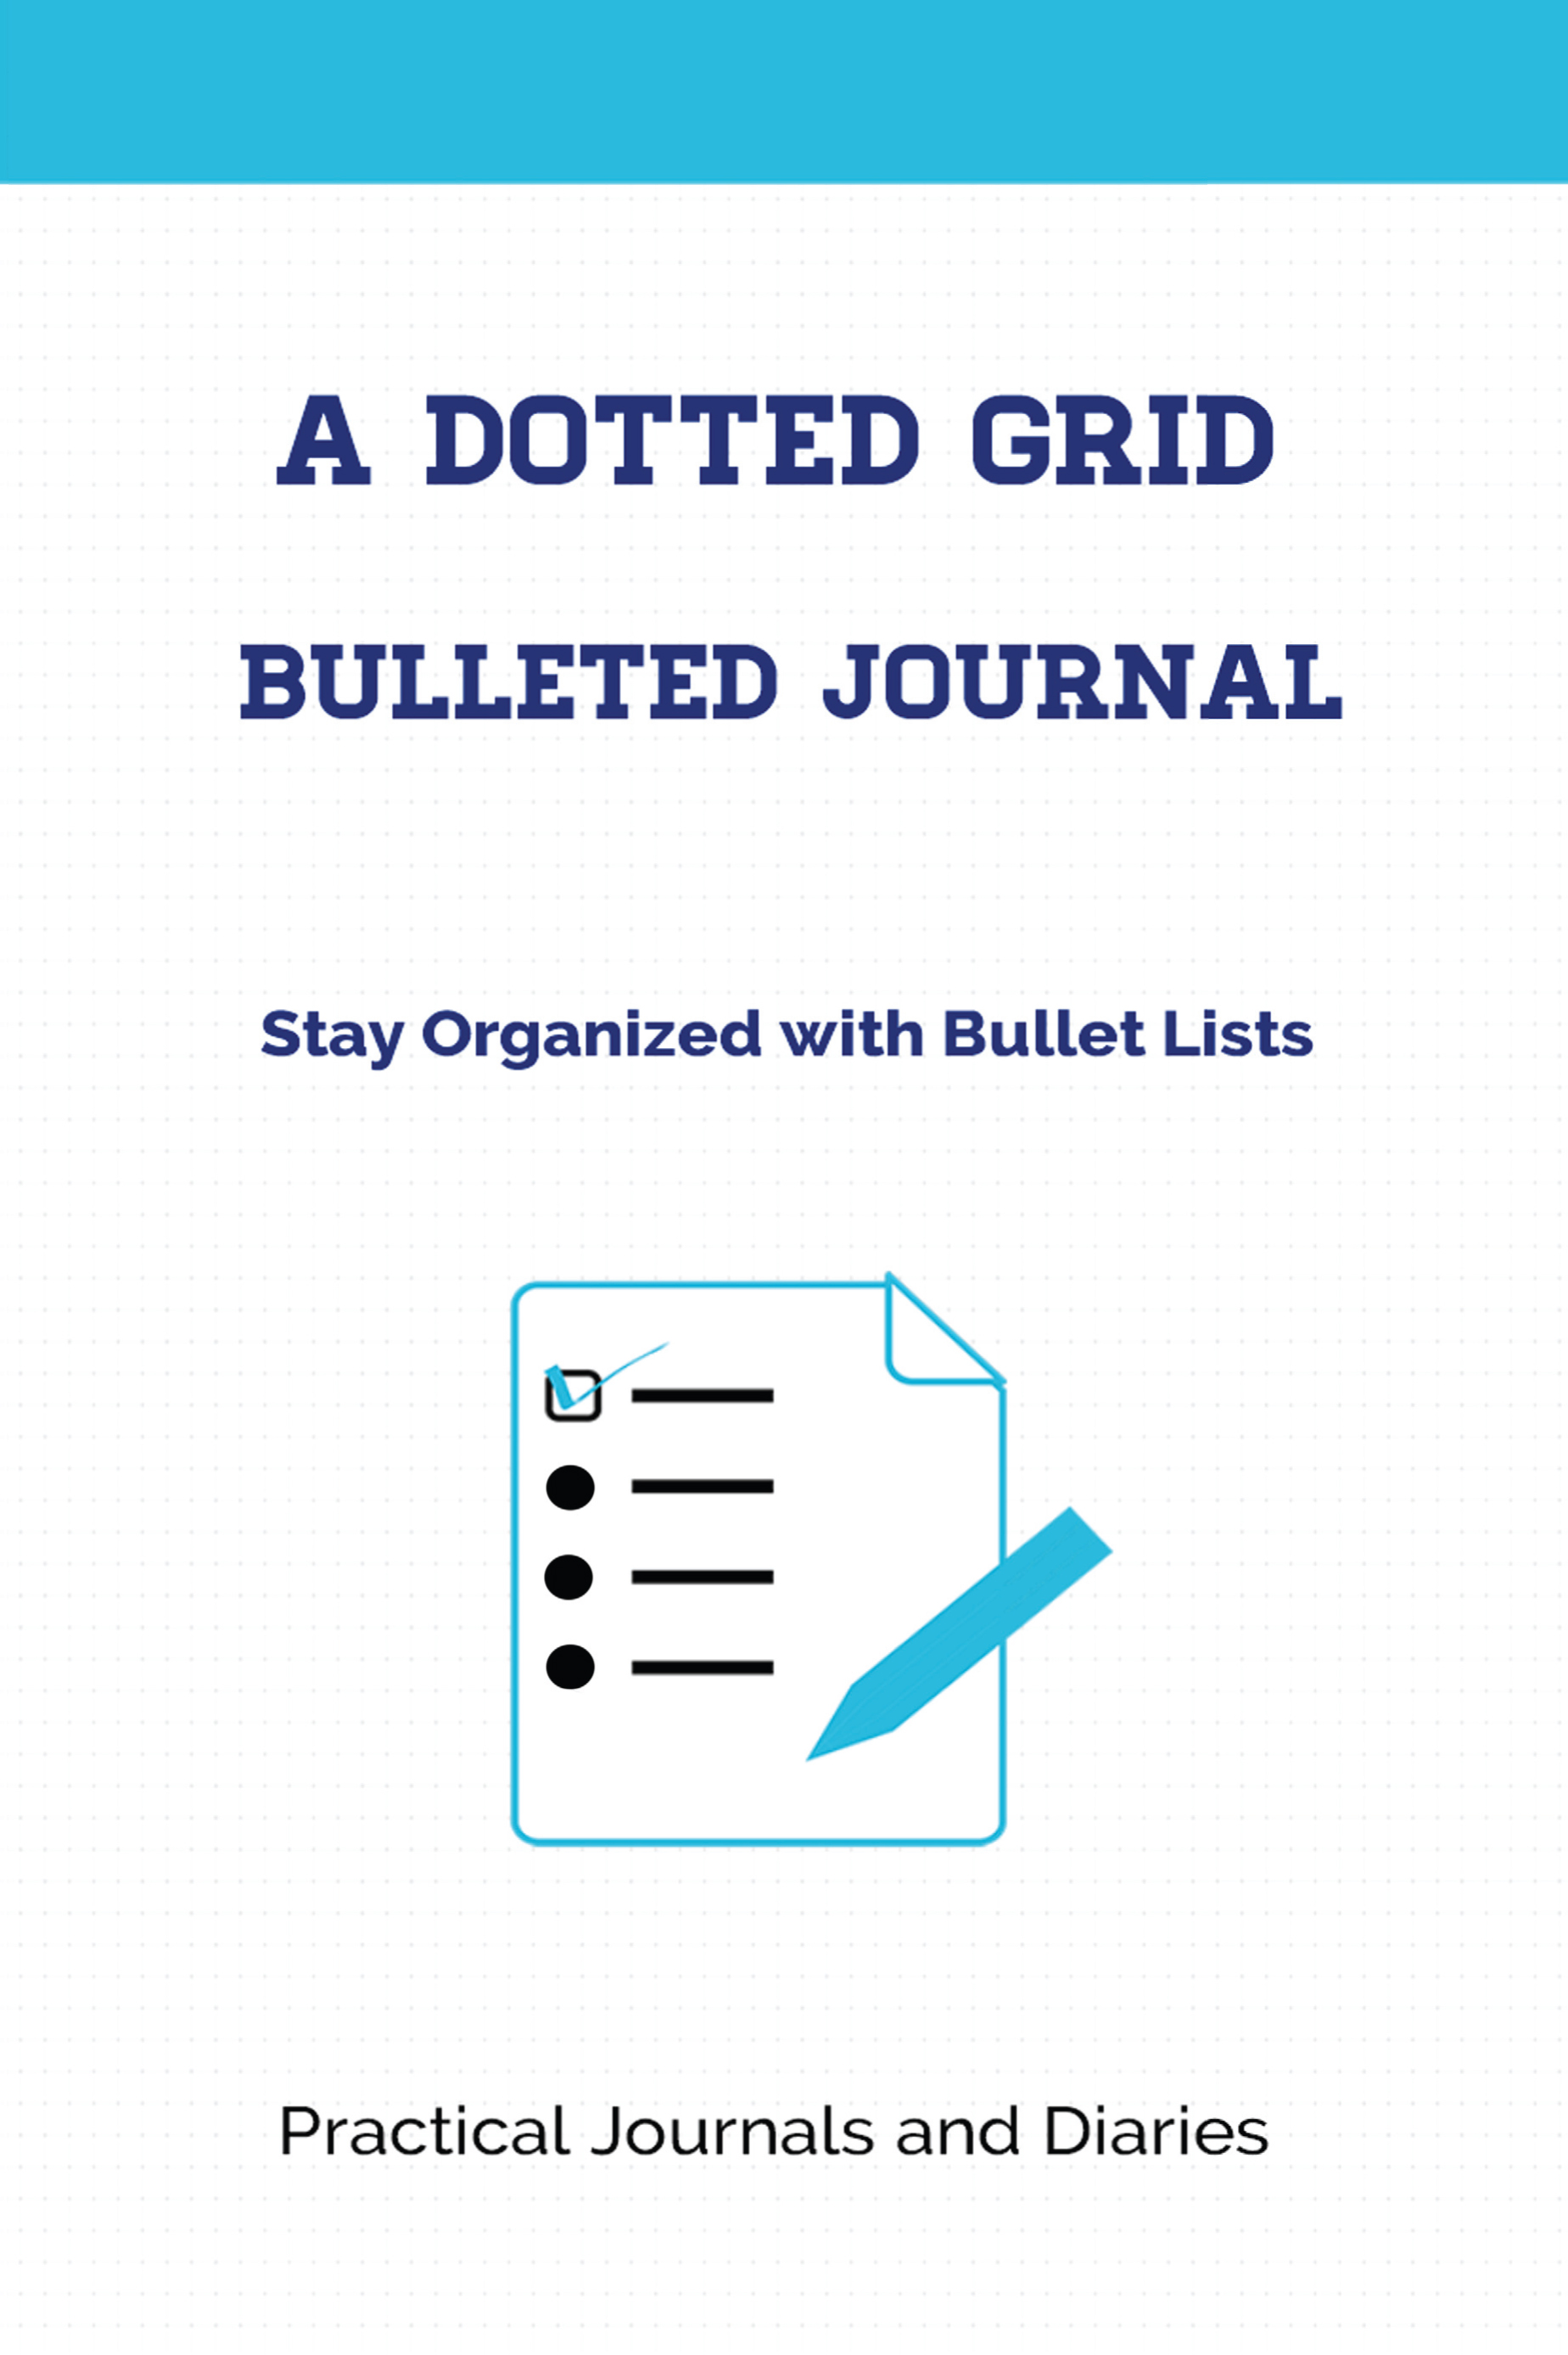 A Dotted Grid Bulleted Journal cover